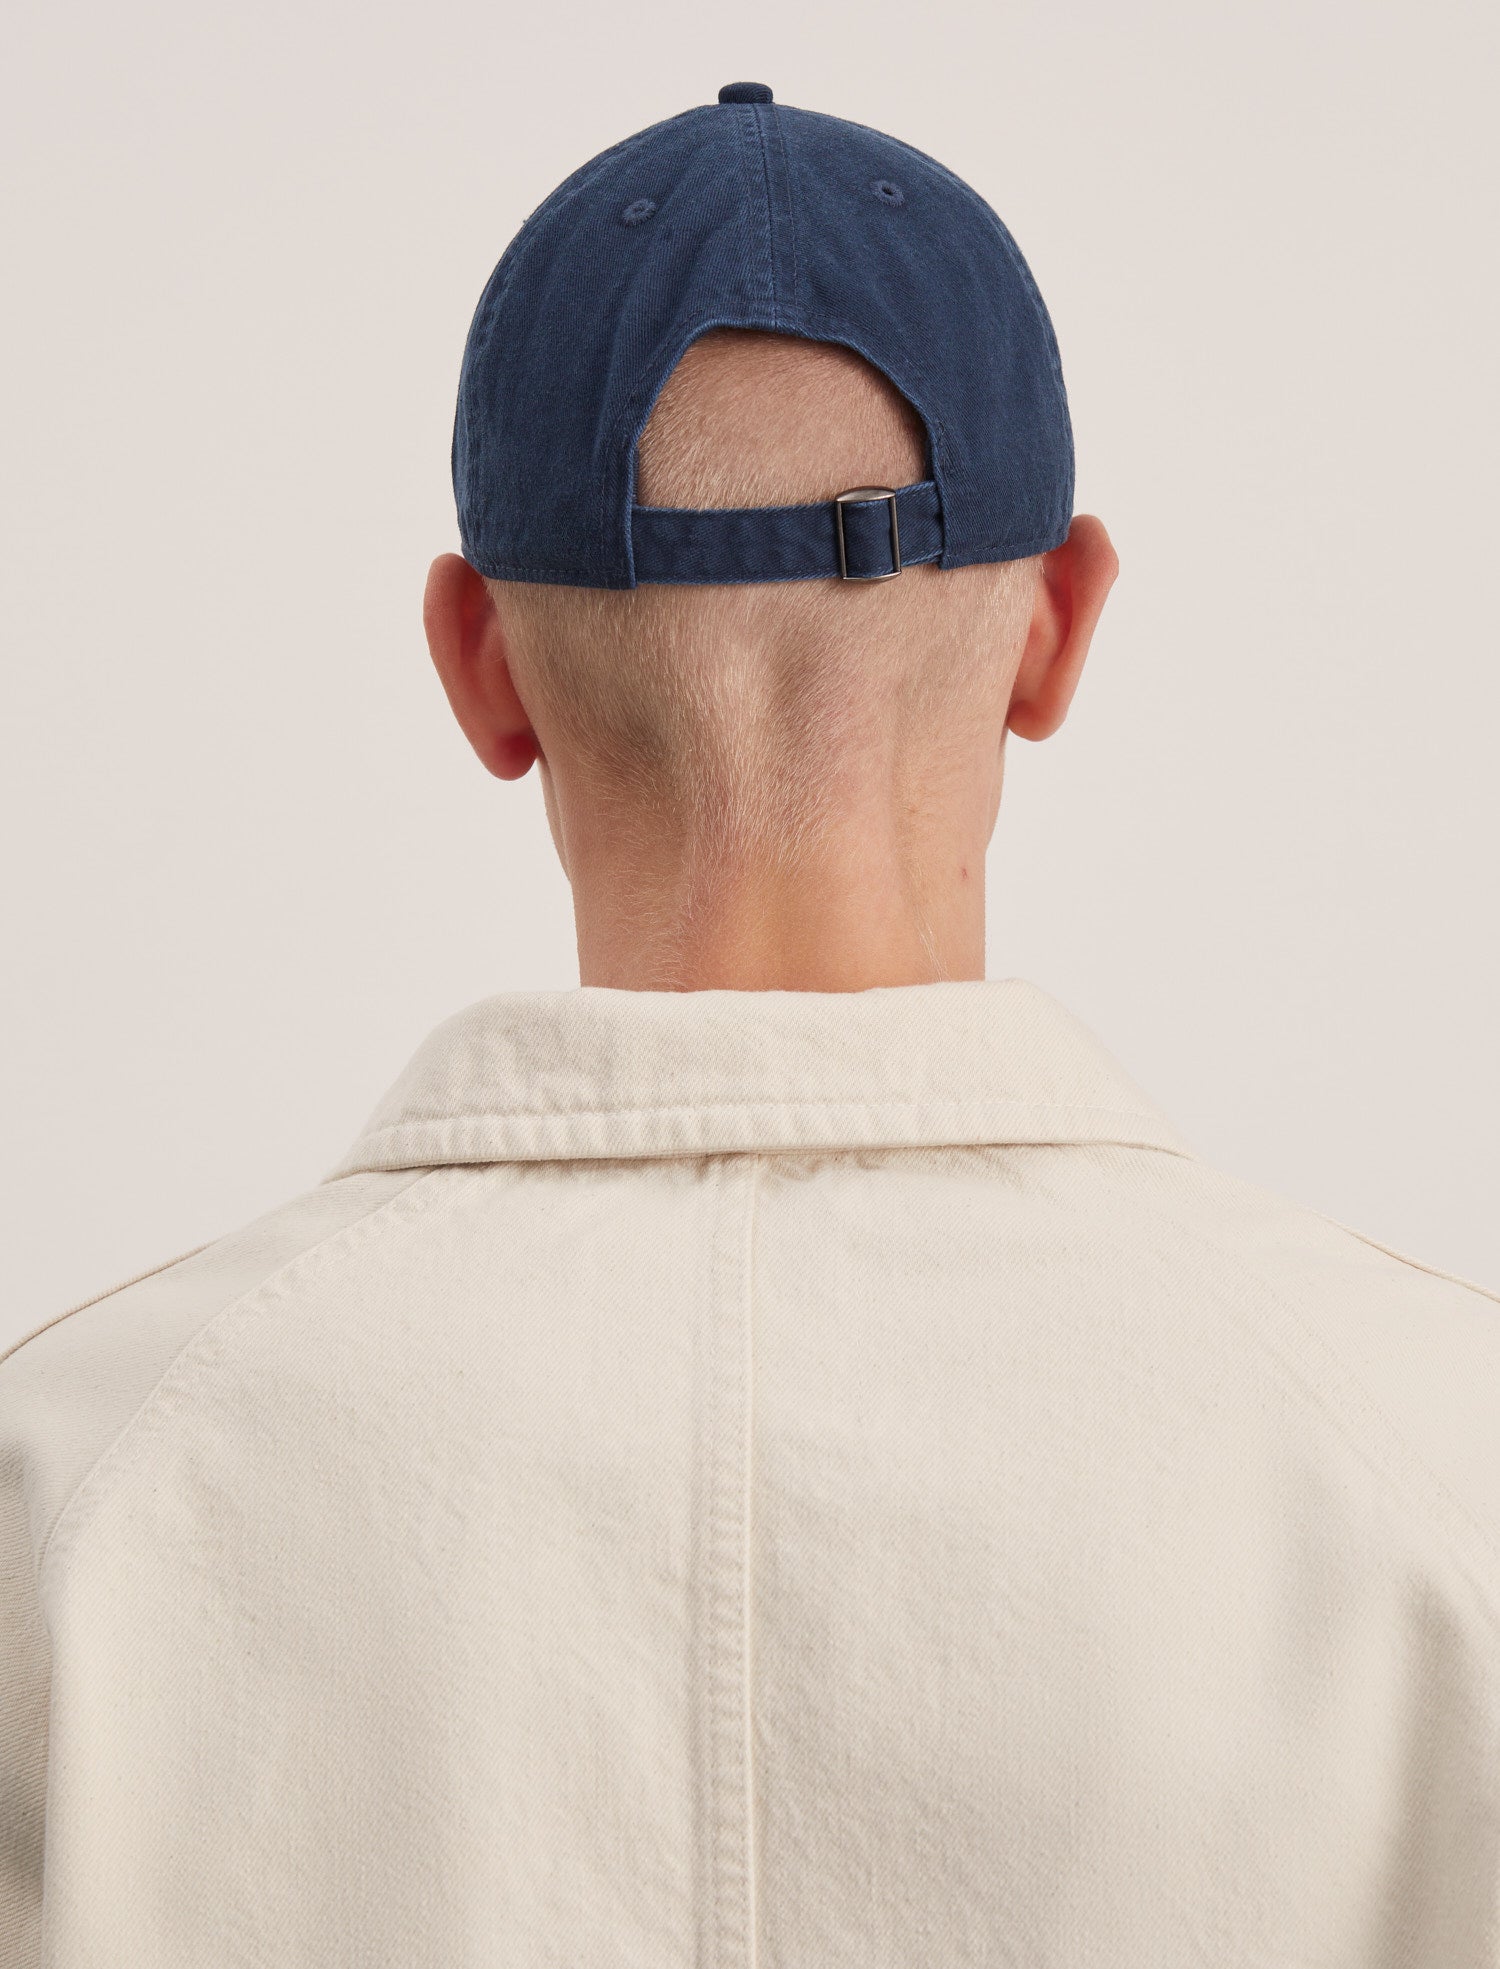 ANOTHER Cap 1.0, Faded Navy